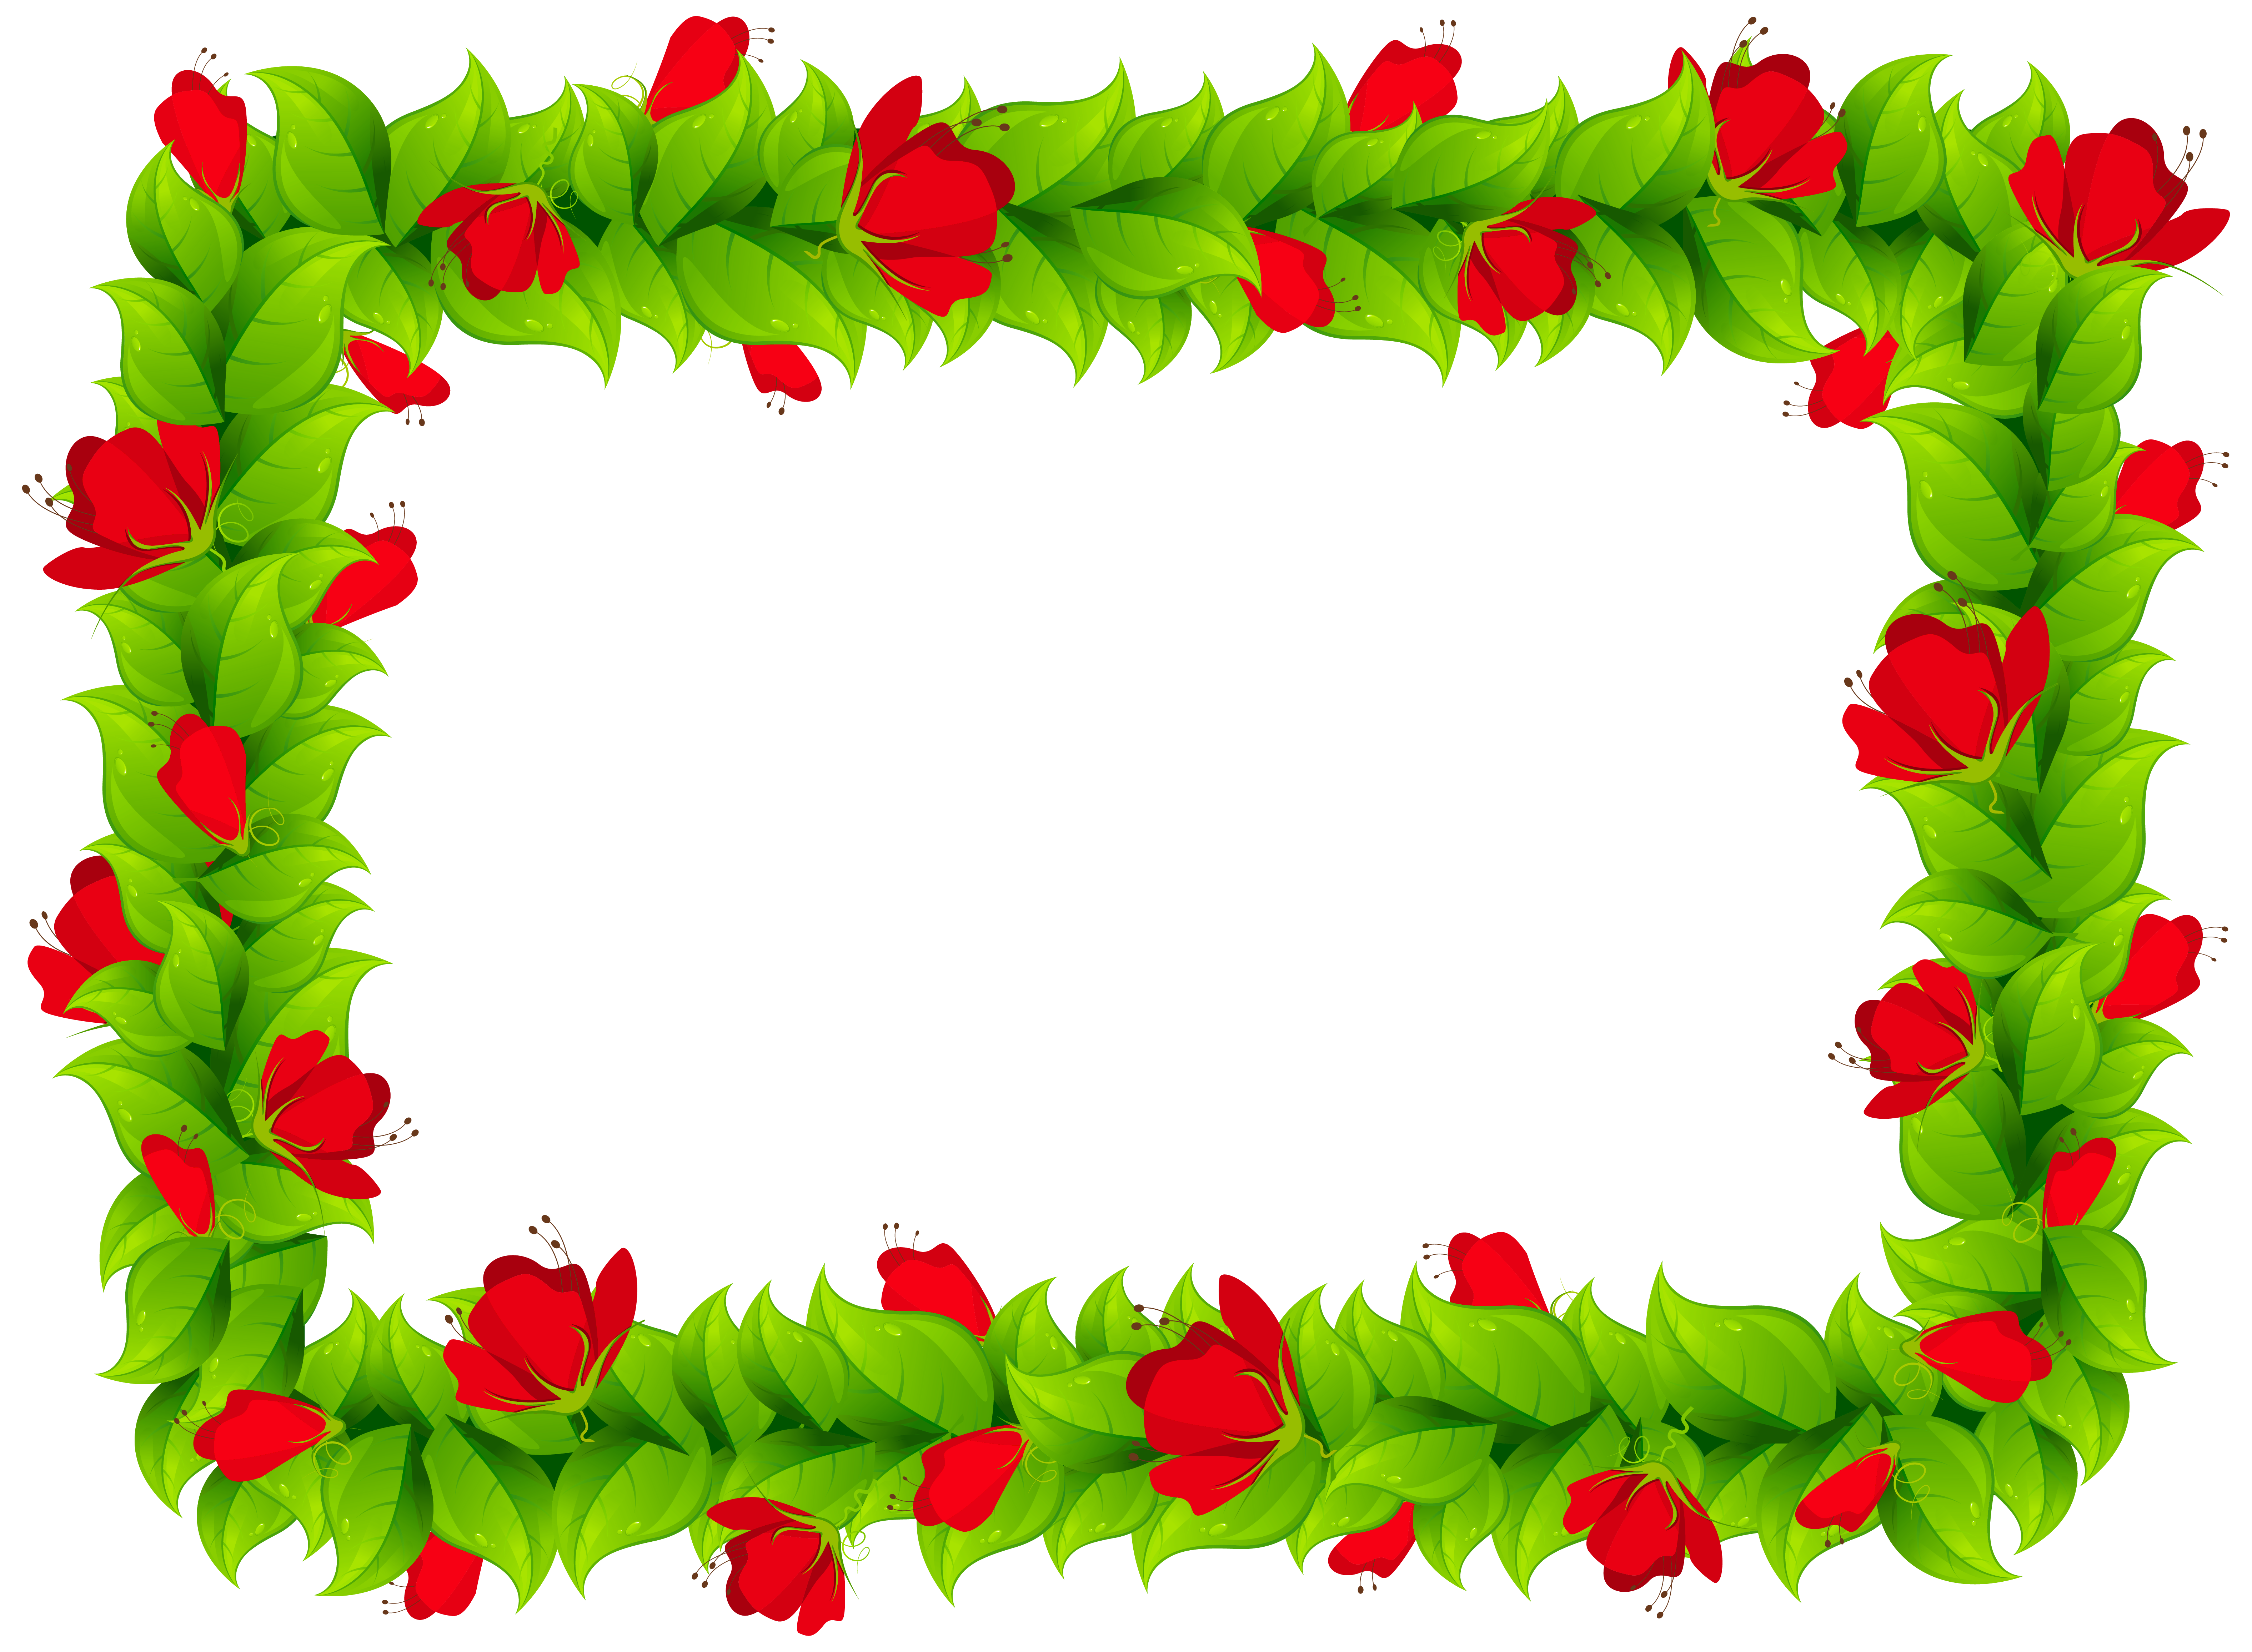 Peppers clipart border. Floral frame png image